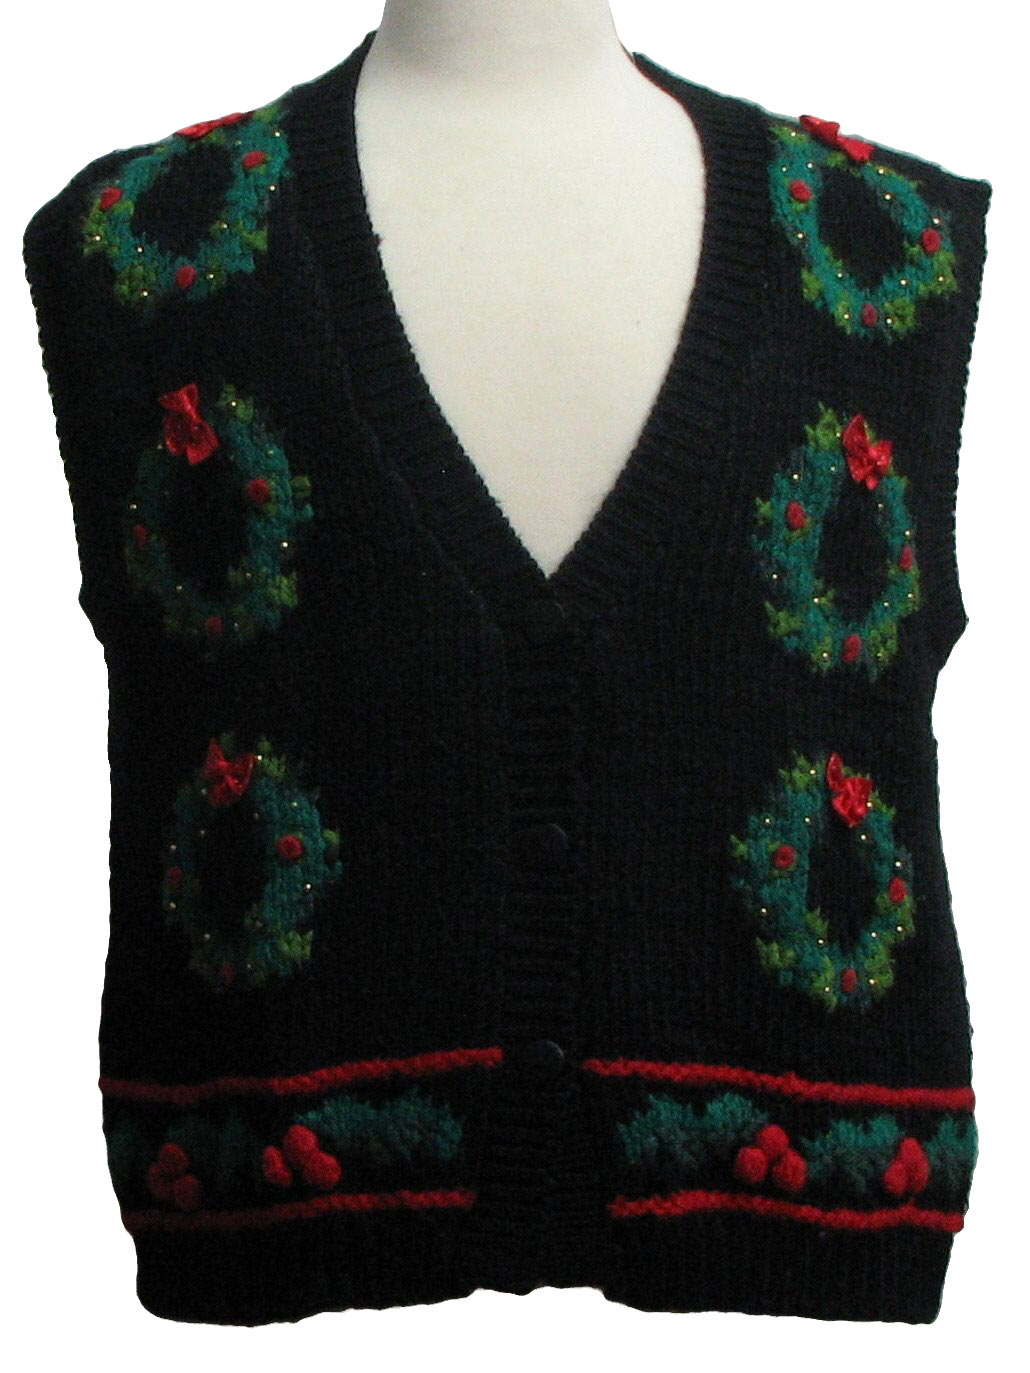 Womens Ugly Christmas Sweater Vest: -Blair Boutique- Womens black ...